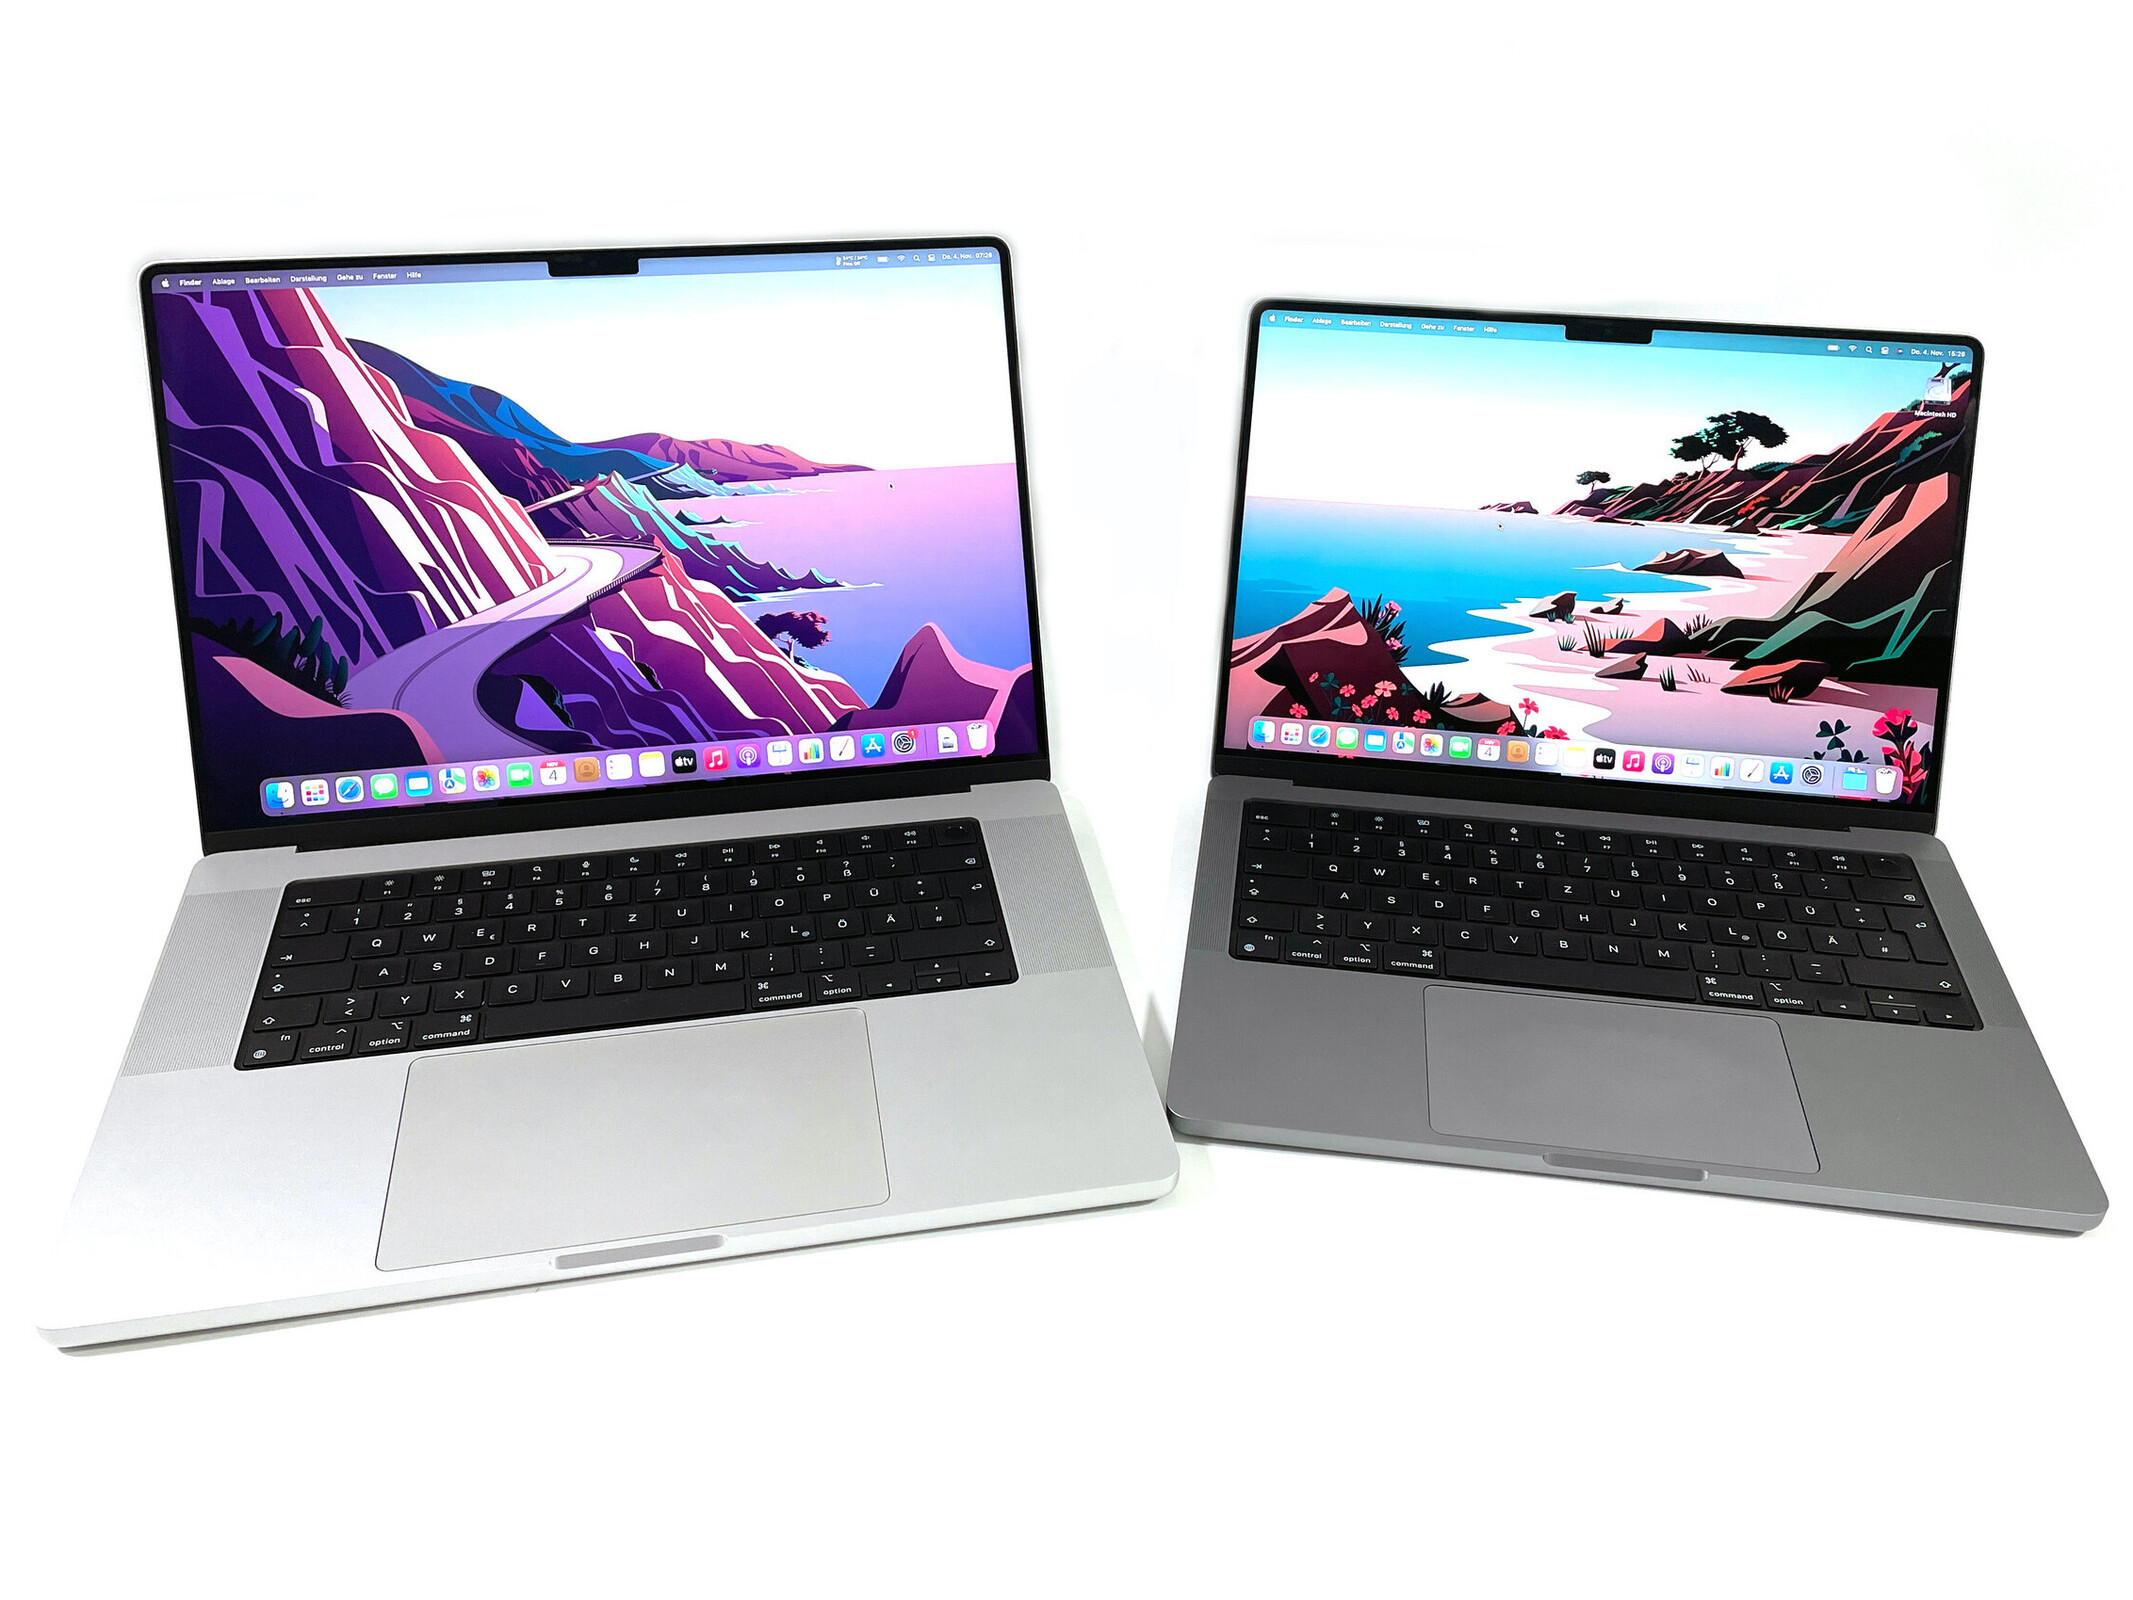 New MacBook Pro with M2 Pro and Max: How to preorder